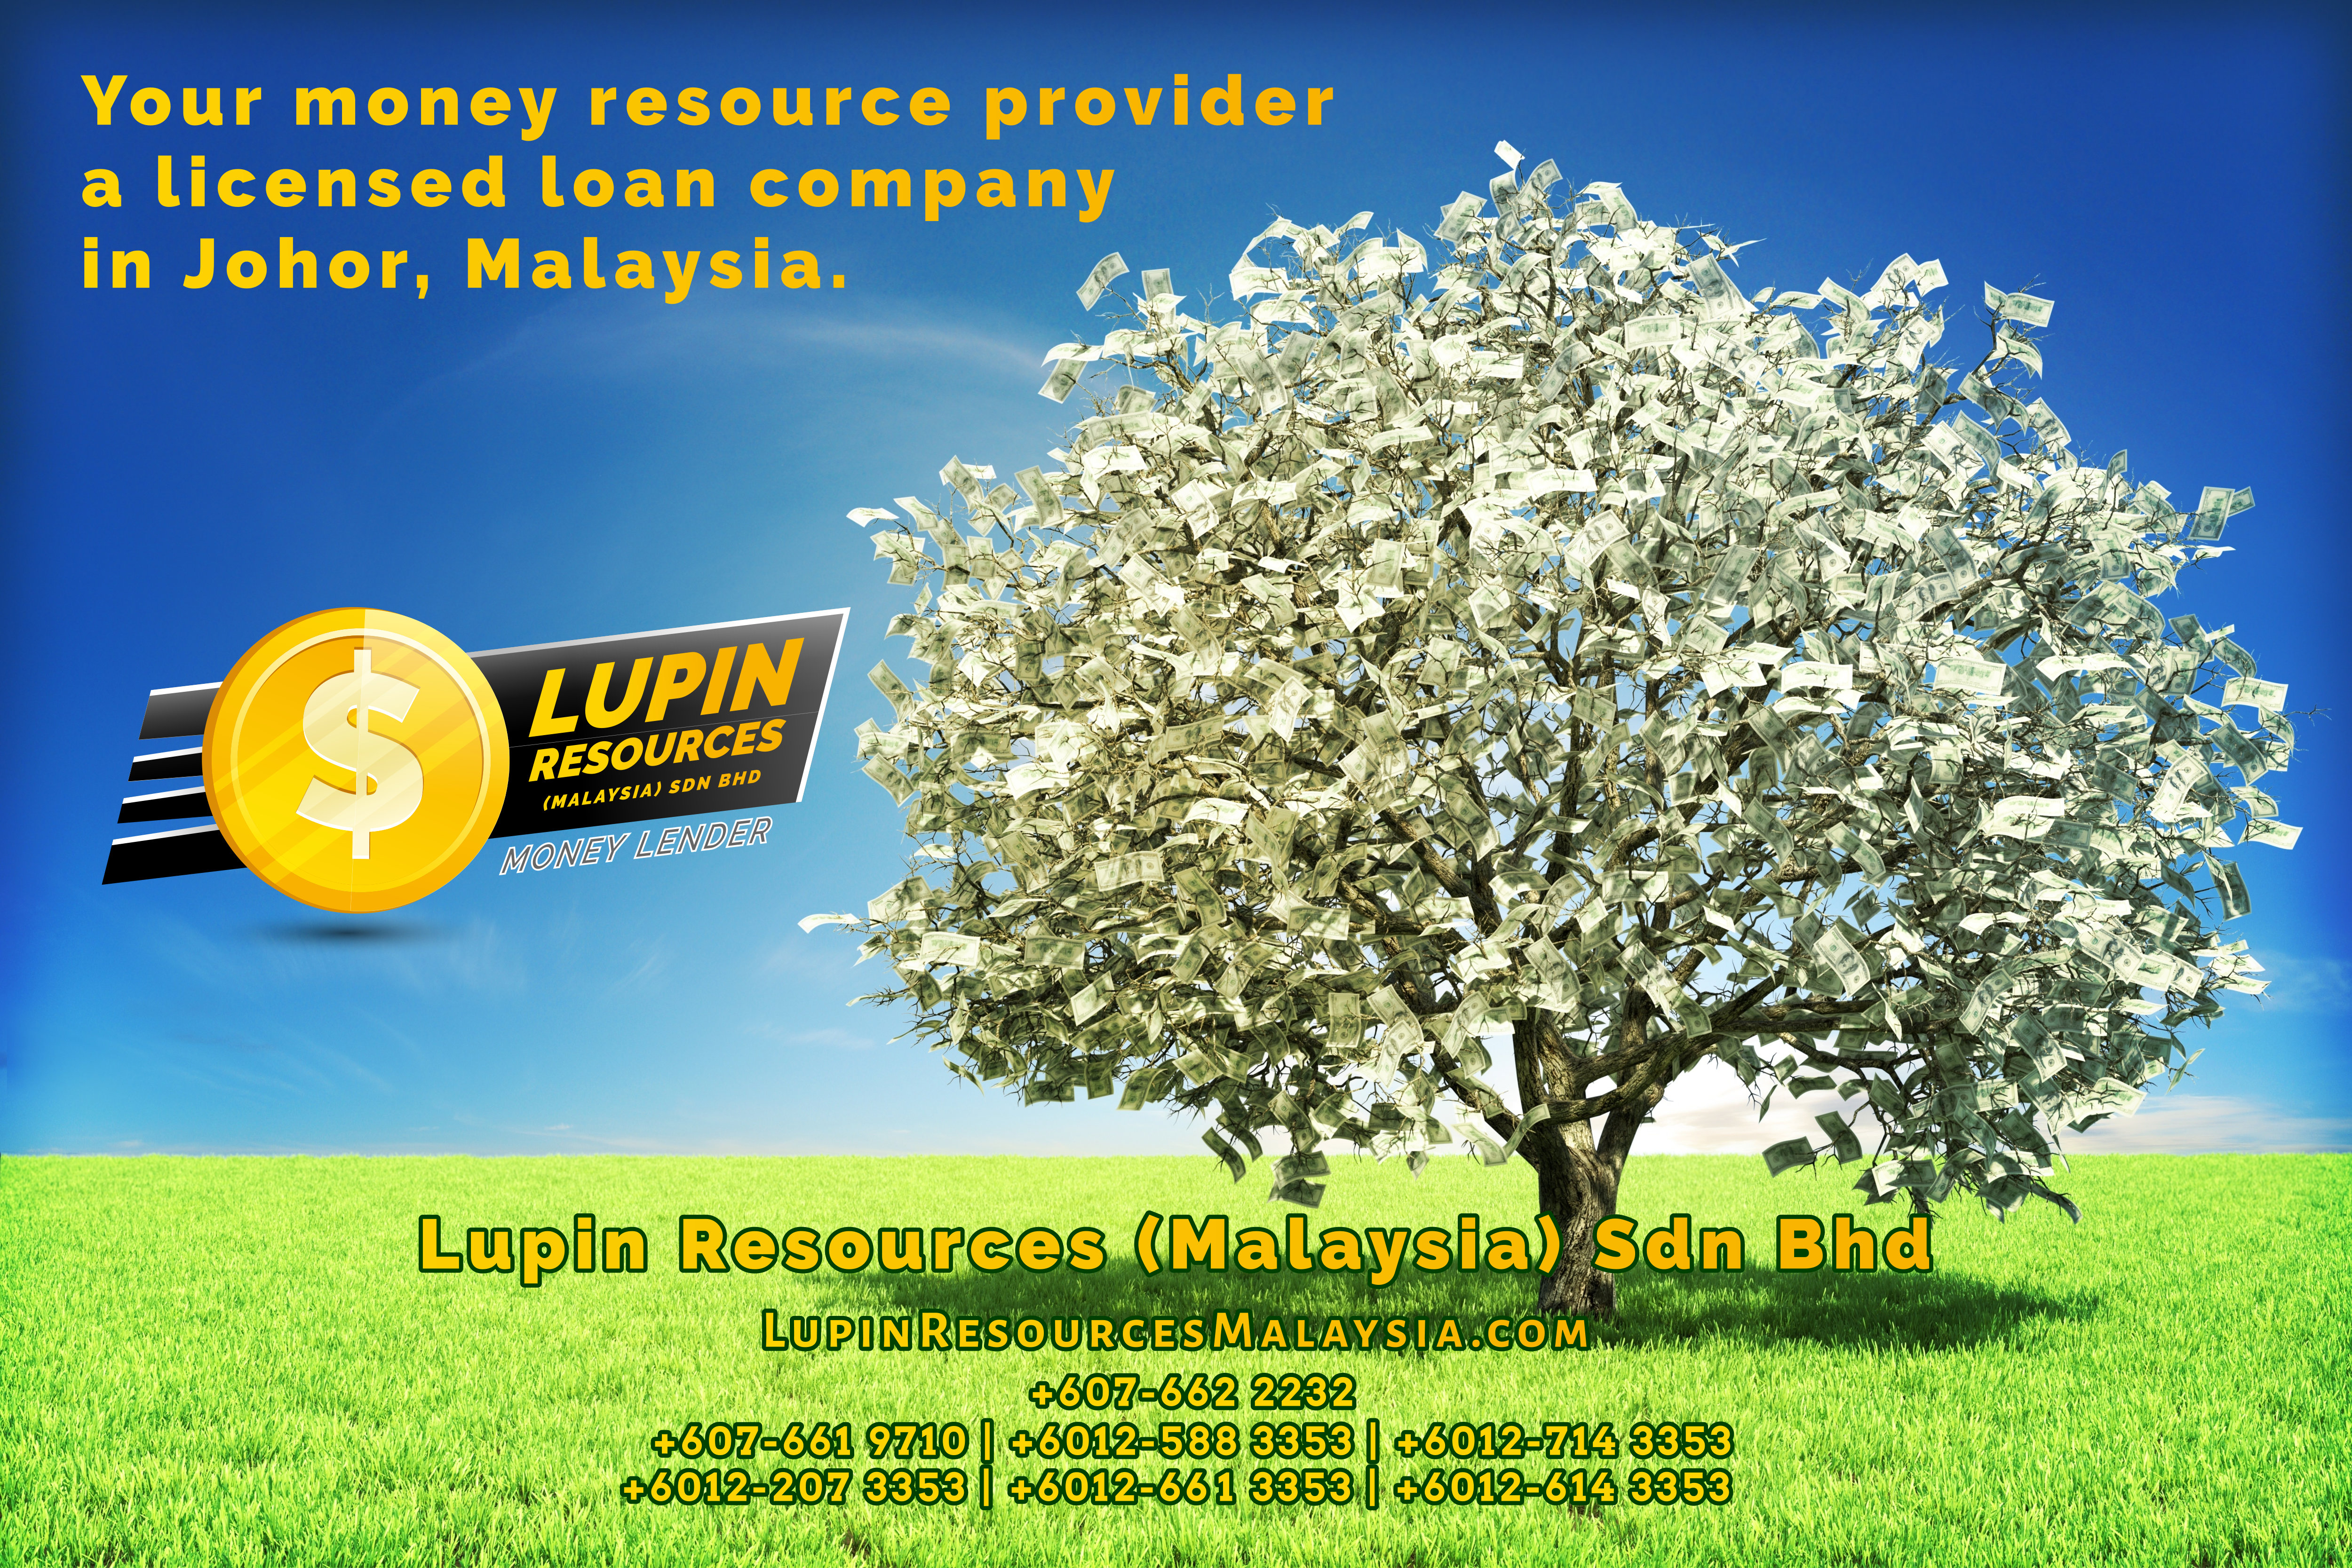 Johor Licensed Loan Company Licensed Money Lender Lupin Resources Malaysia SDN BHD Your money resource provider Kulai Johor Bahru Johor Malaysia Business Loan A01-47